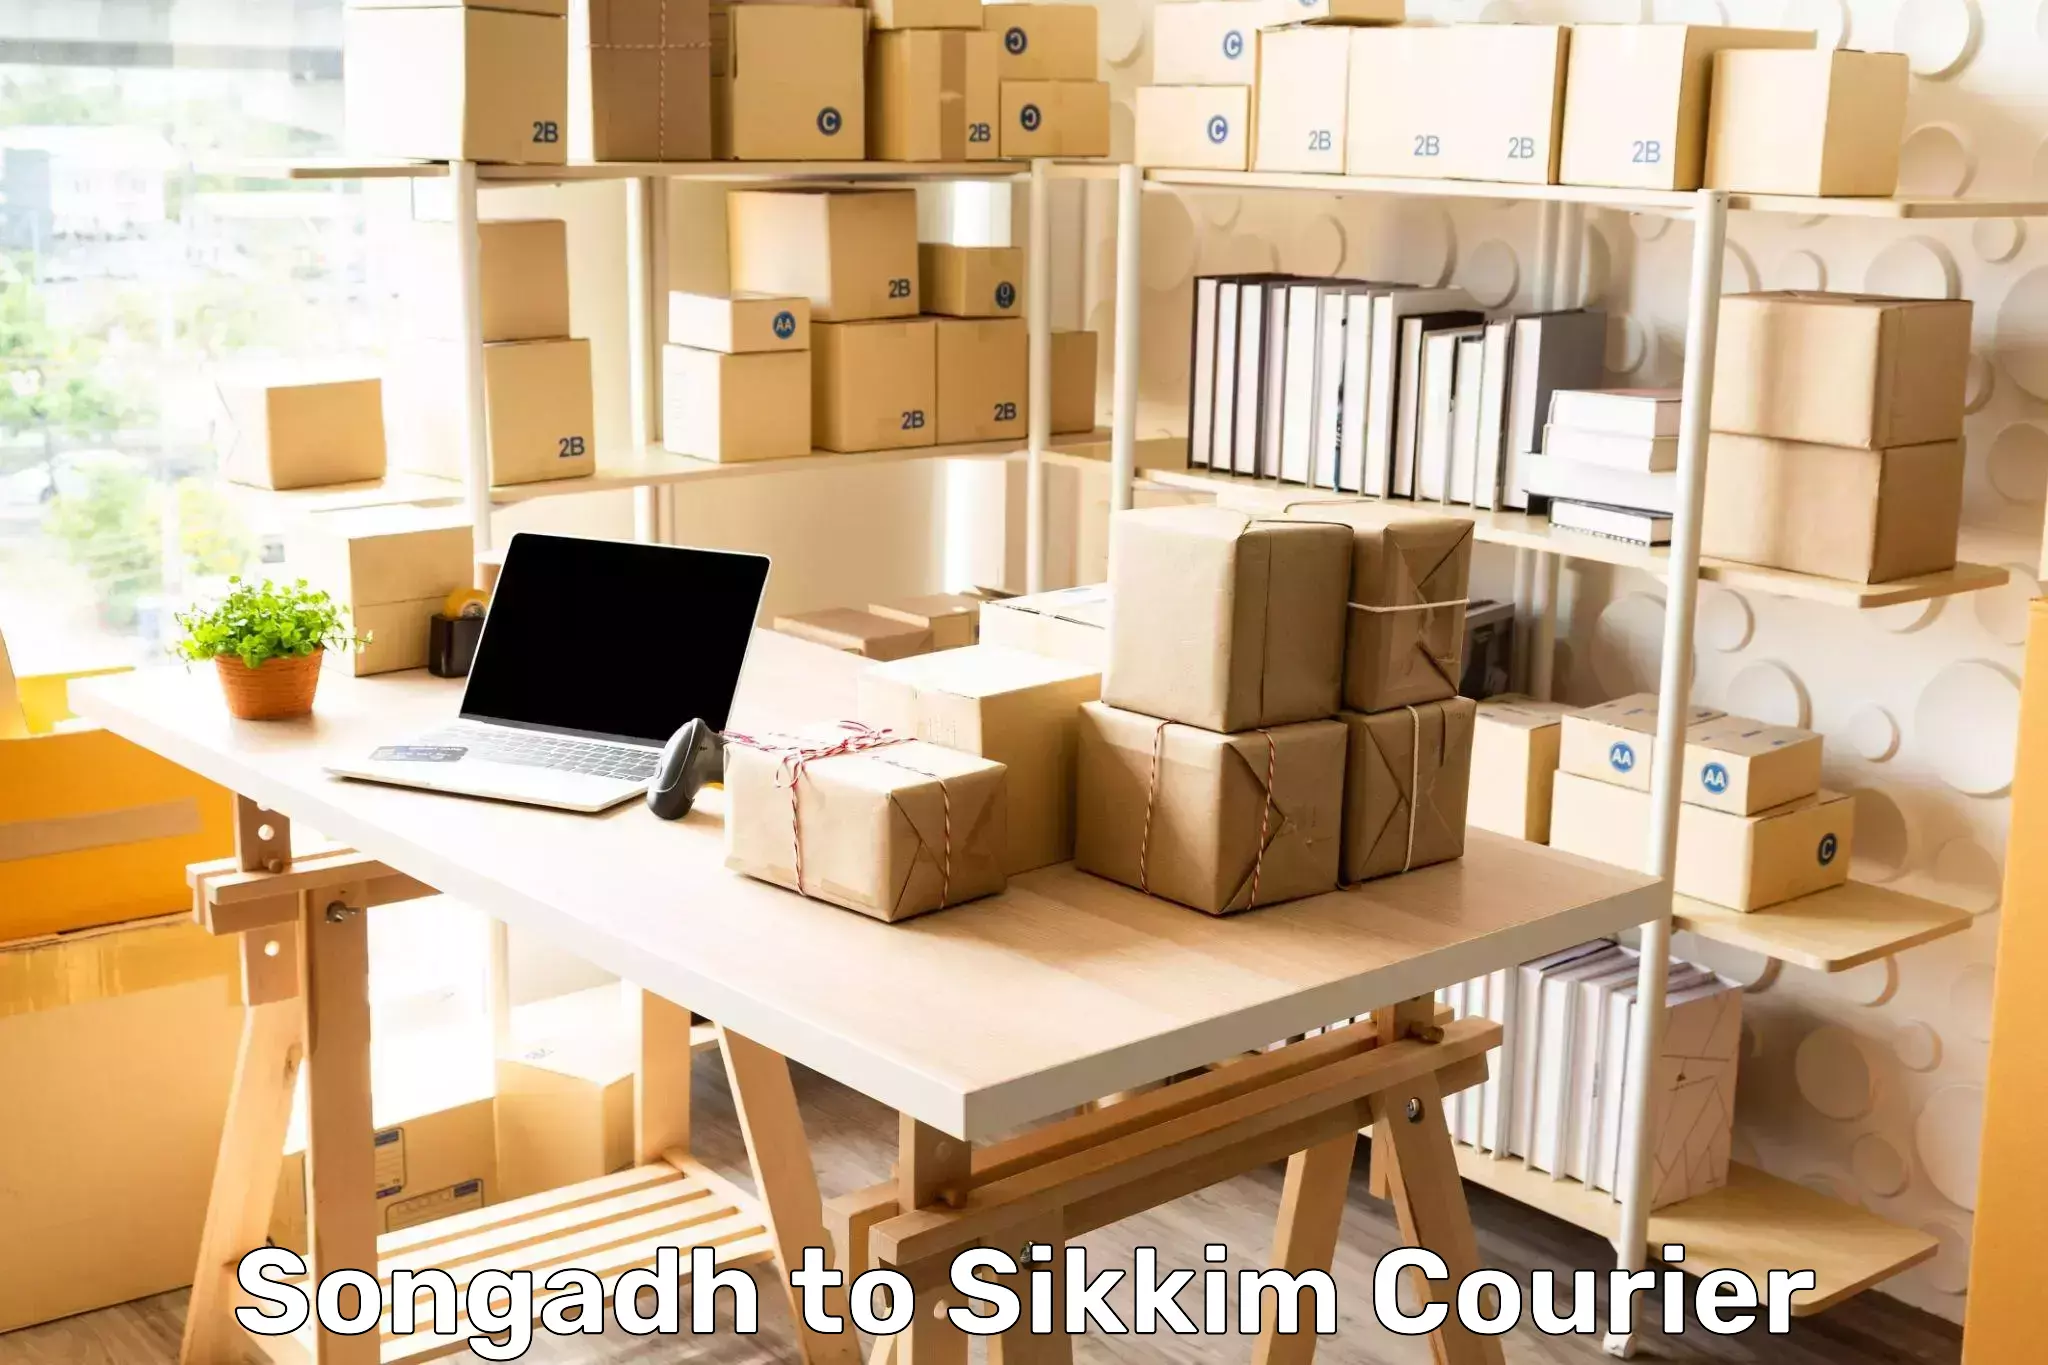 Sustainable shipping practices Songadh to Sikkim